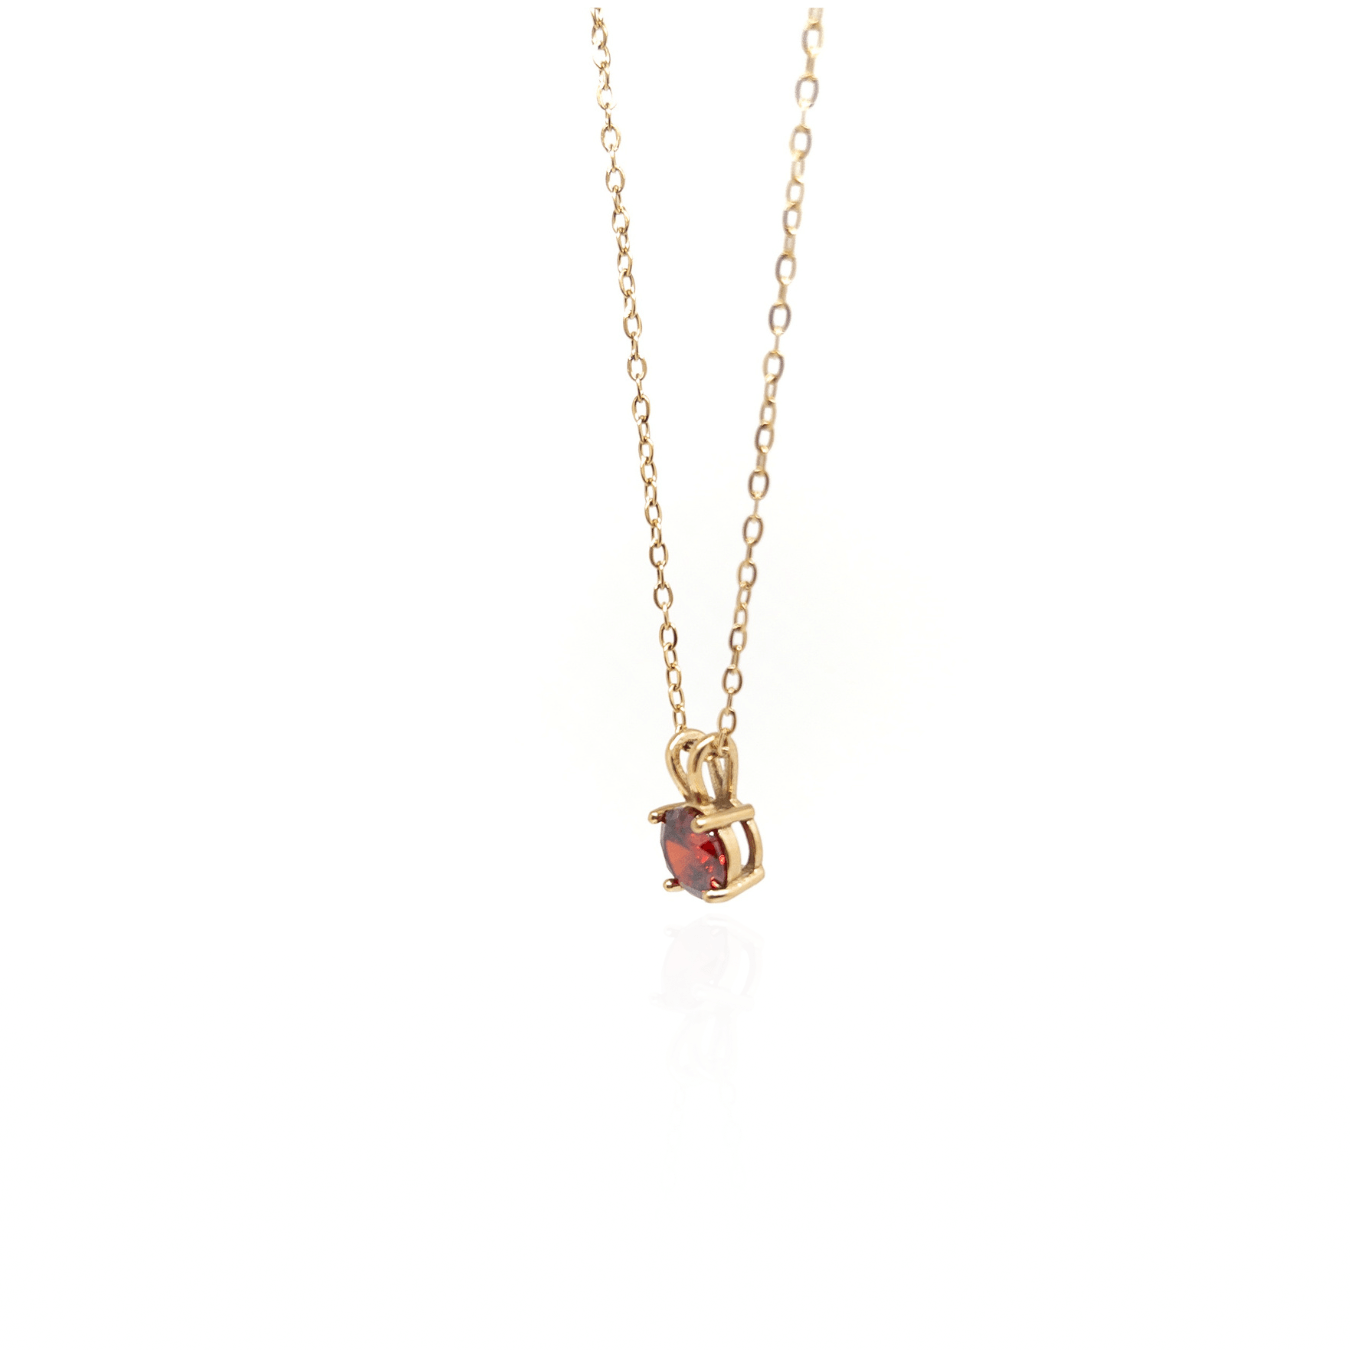 The Red Zircon Necklace